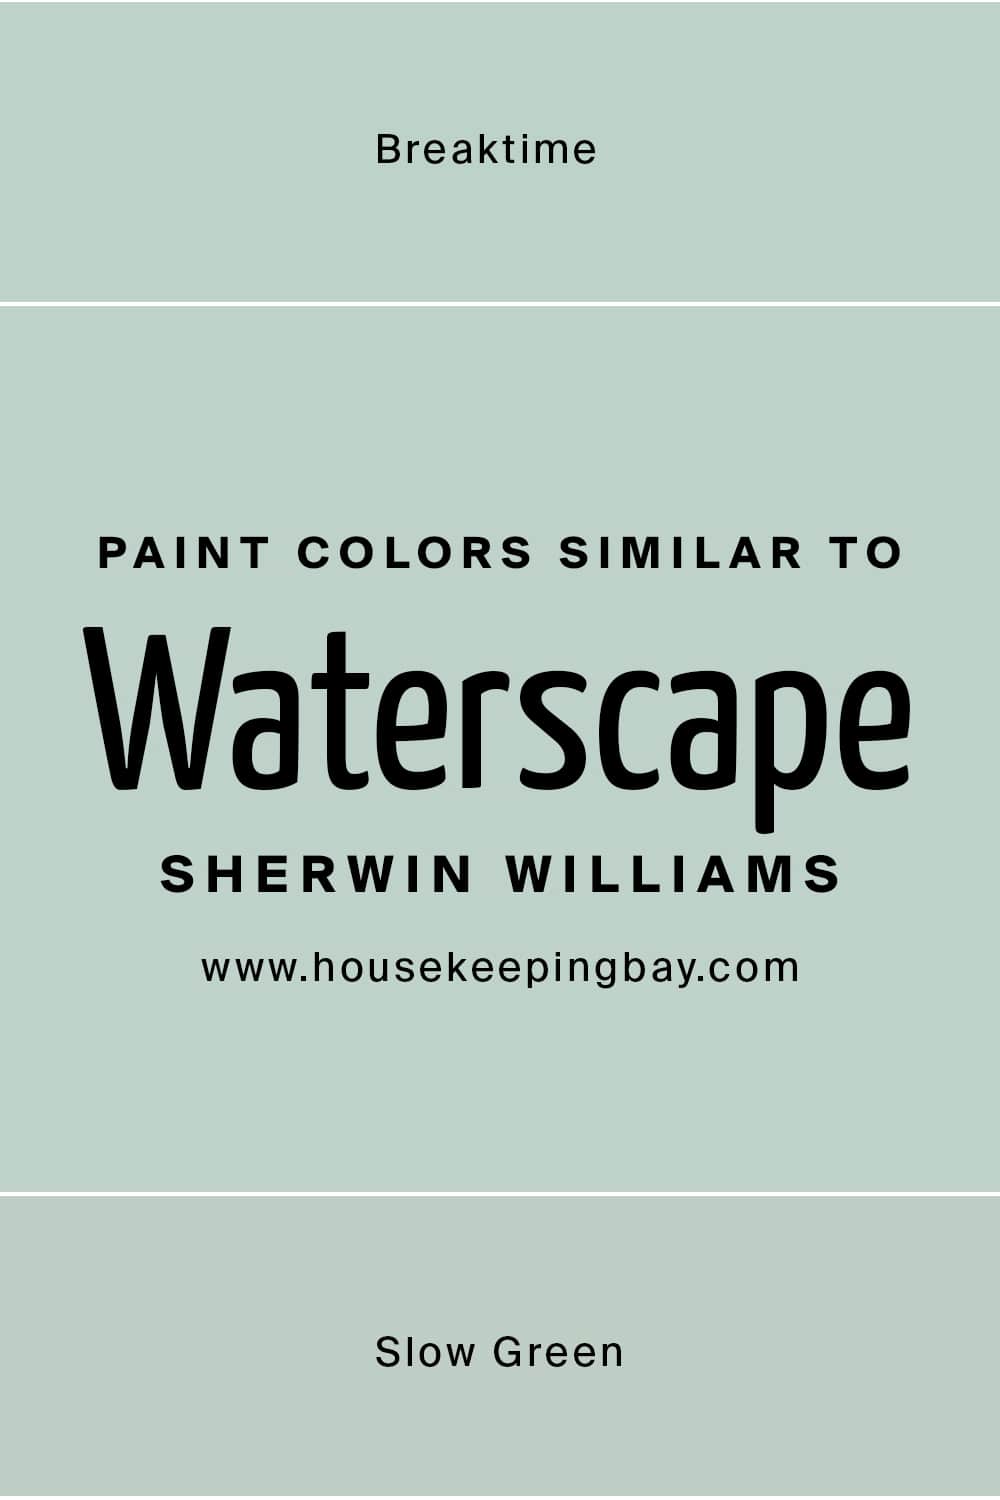 Paint Colors Similar to Waterscape by Sherwin Williams